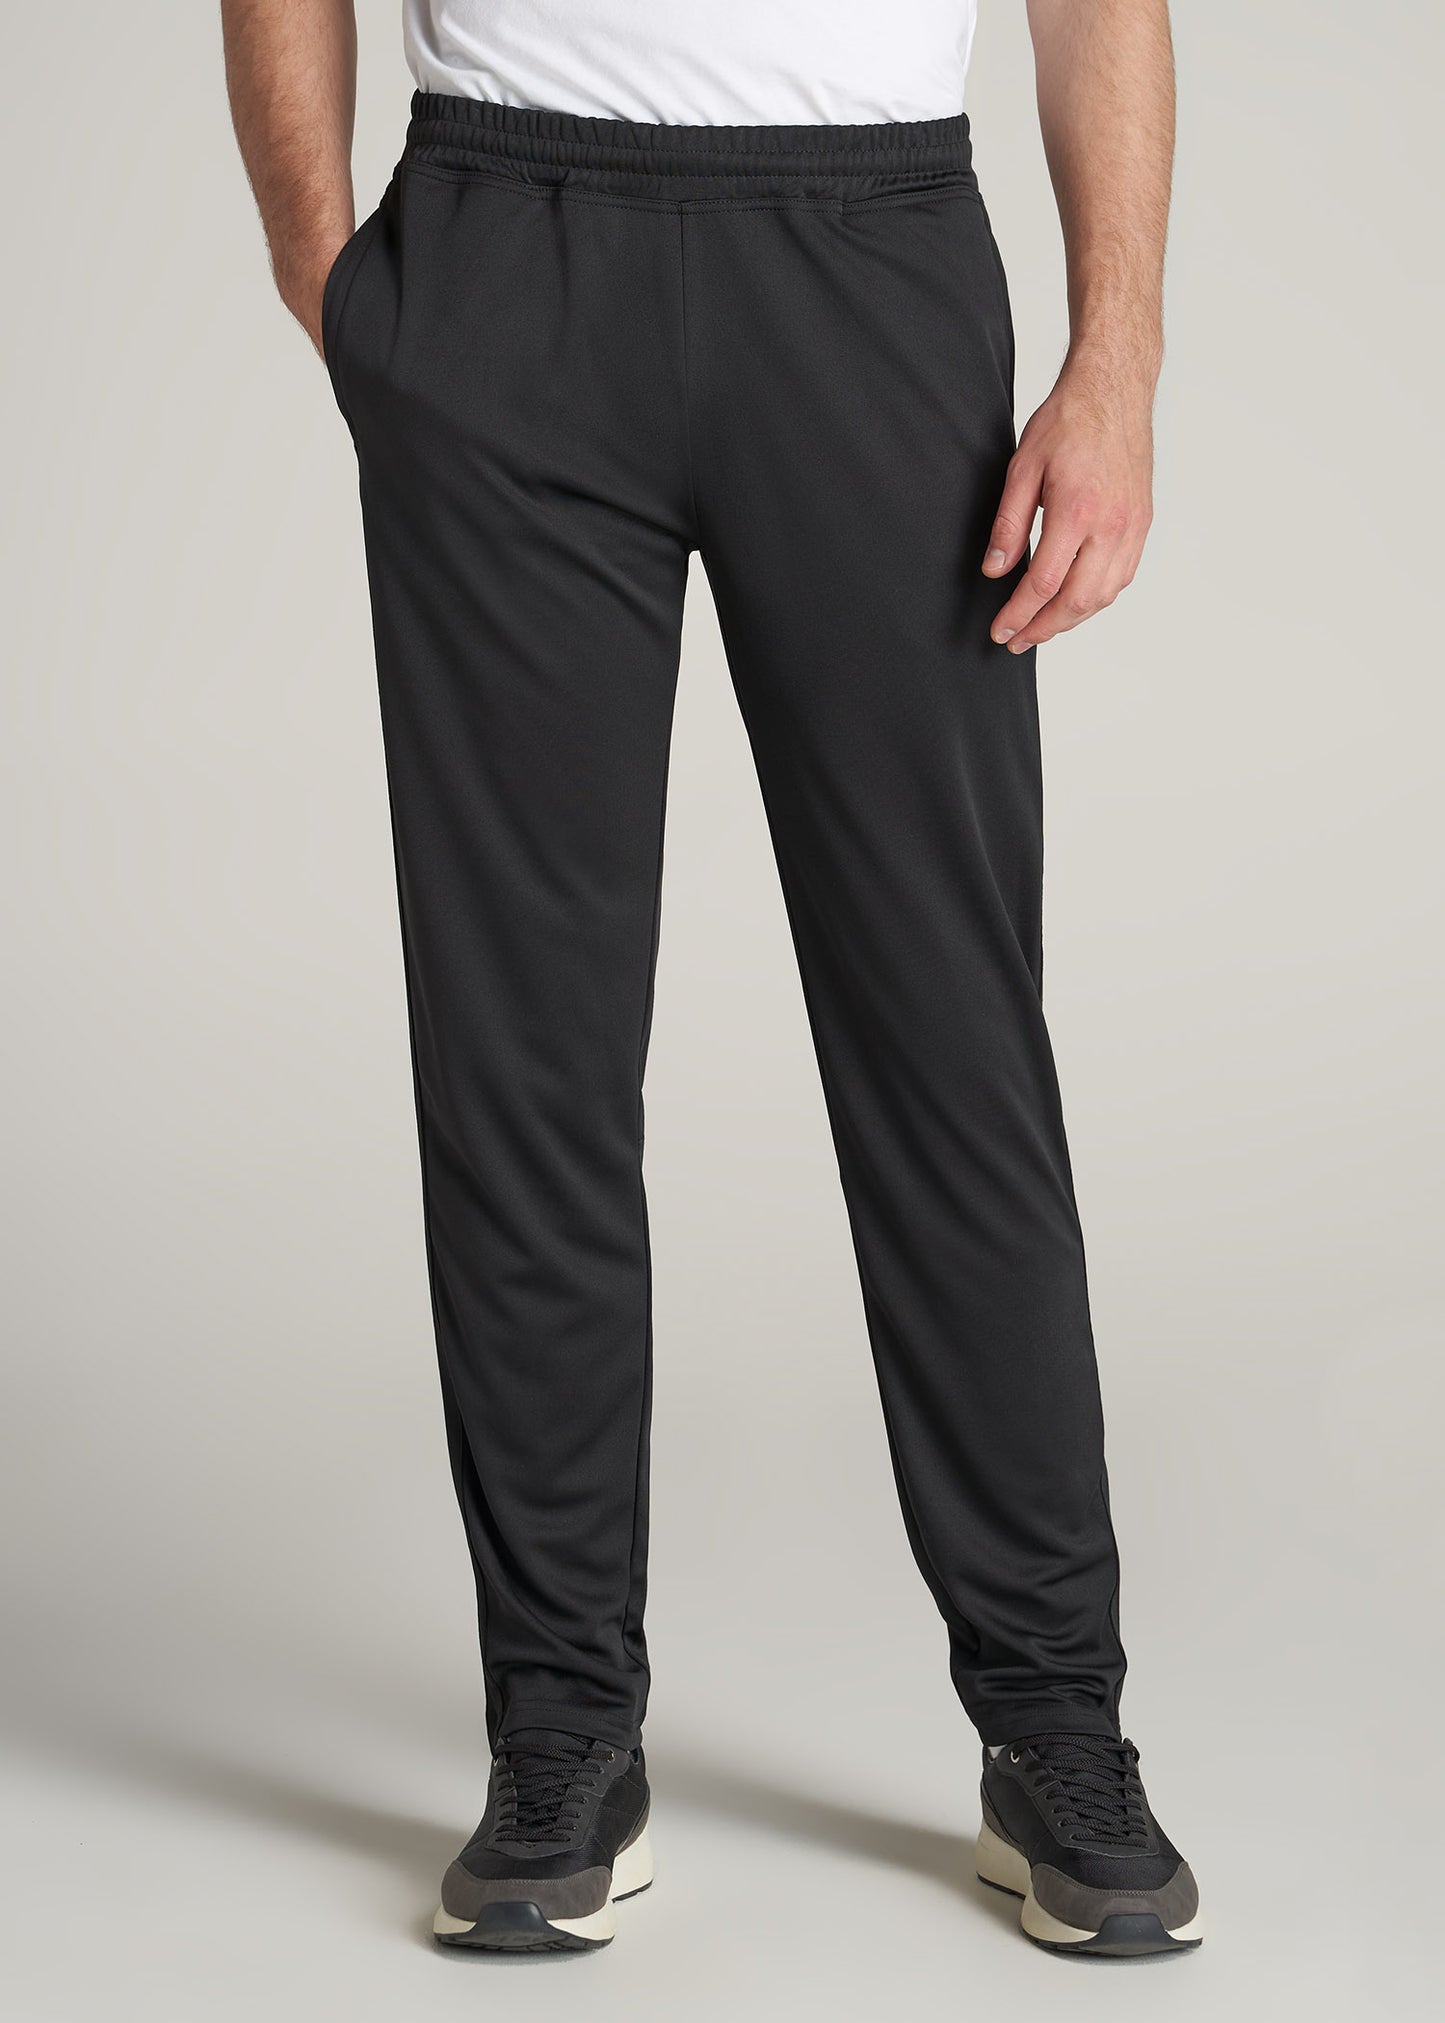 Athletic Stripe Pants for Tall Men in Black And Black – American Tall